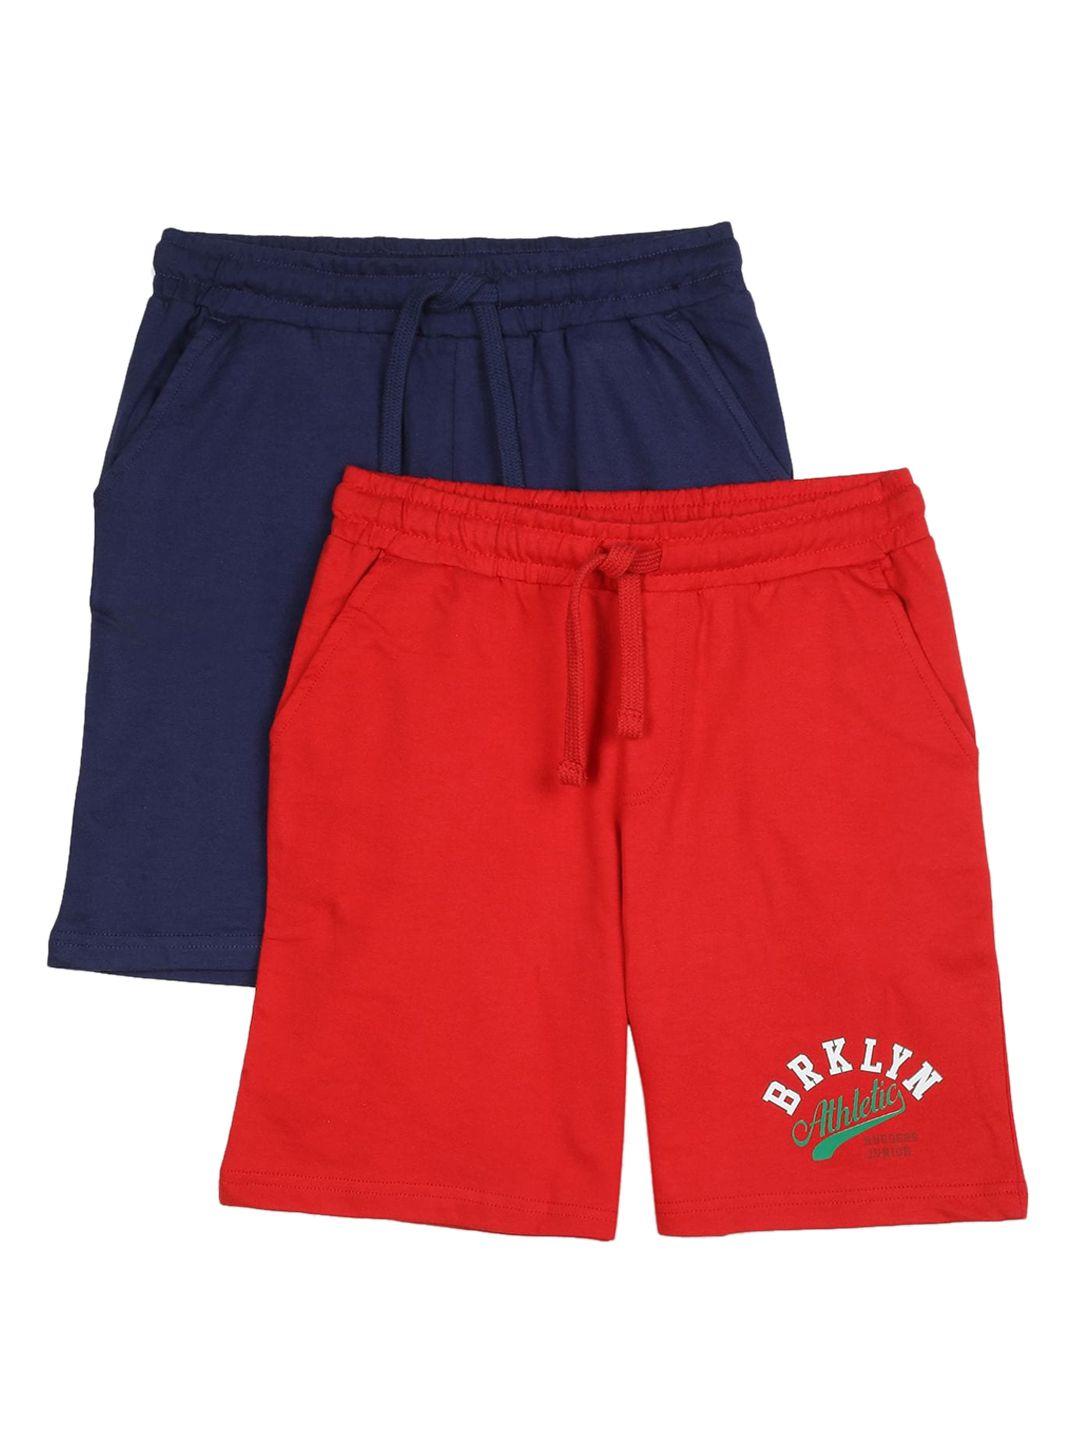 ruggers junior boys pack of 2 assorted pure cotton shorts